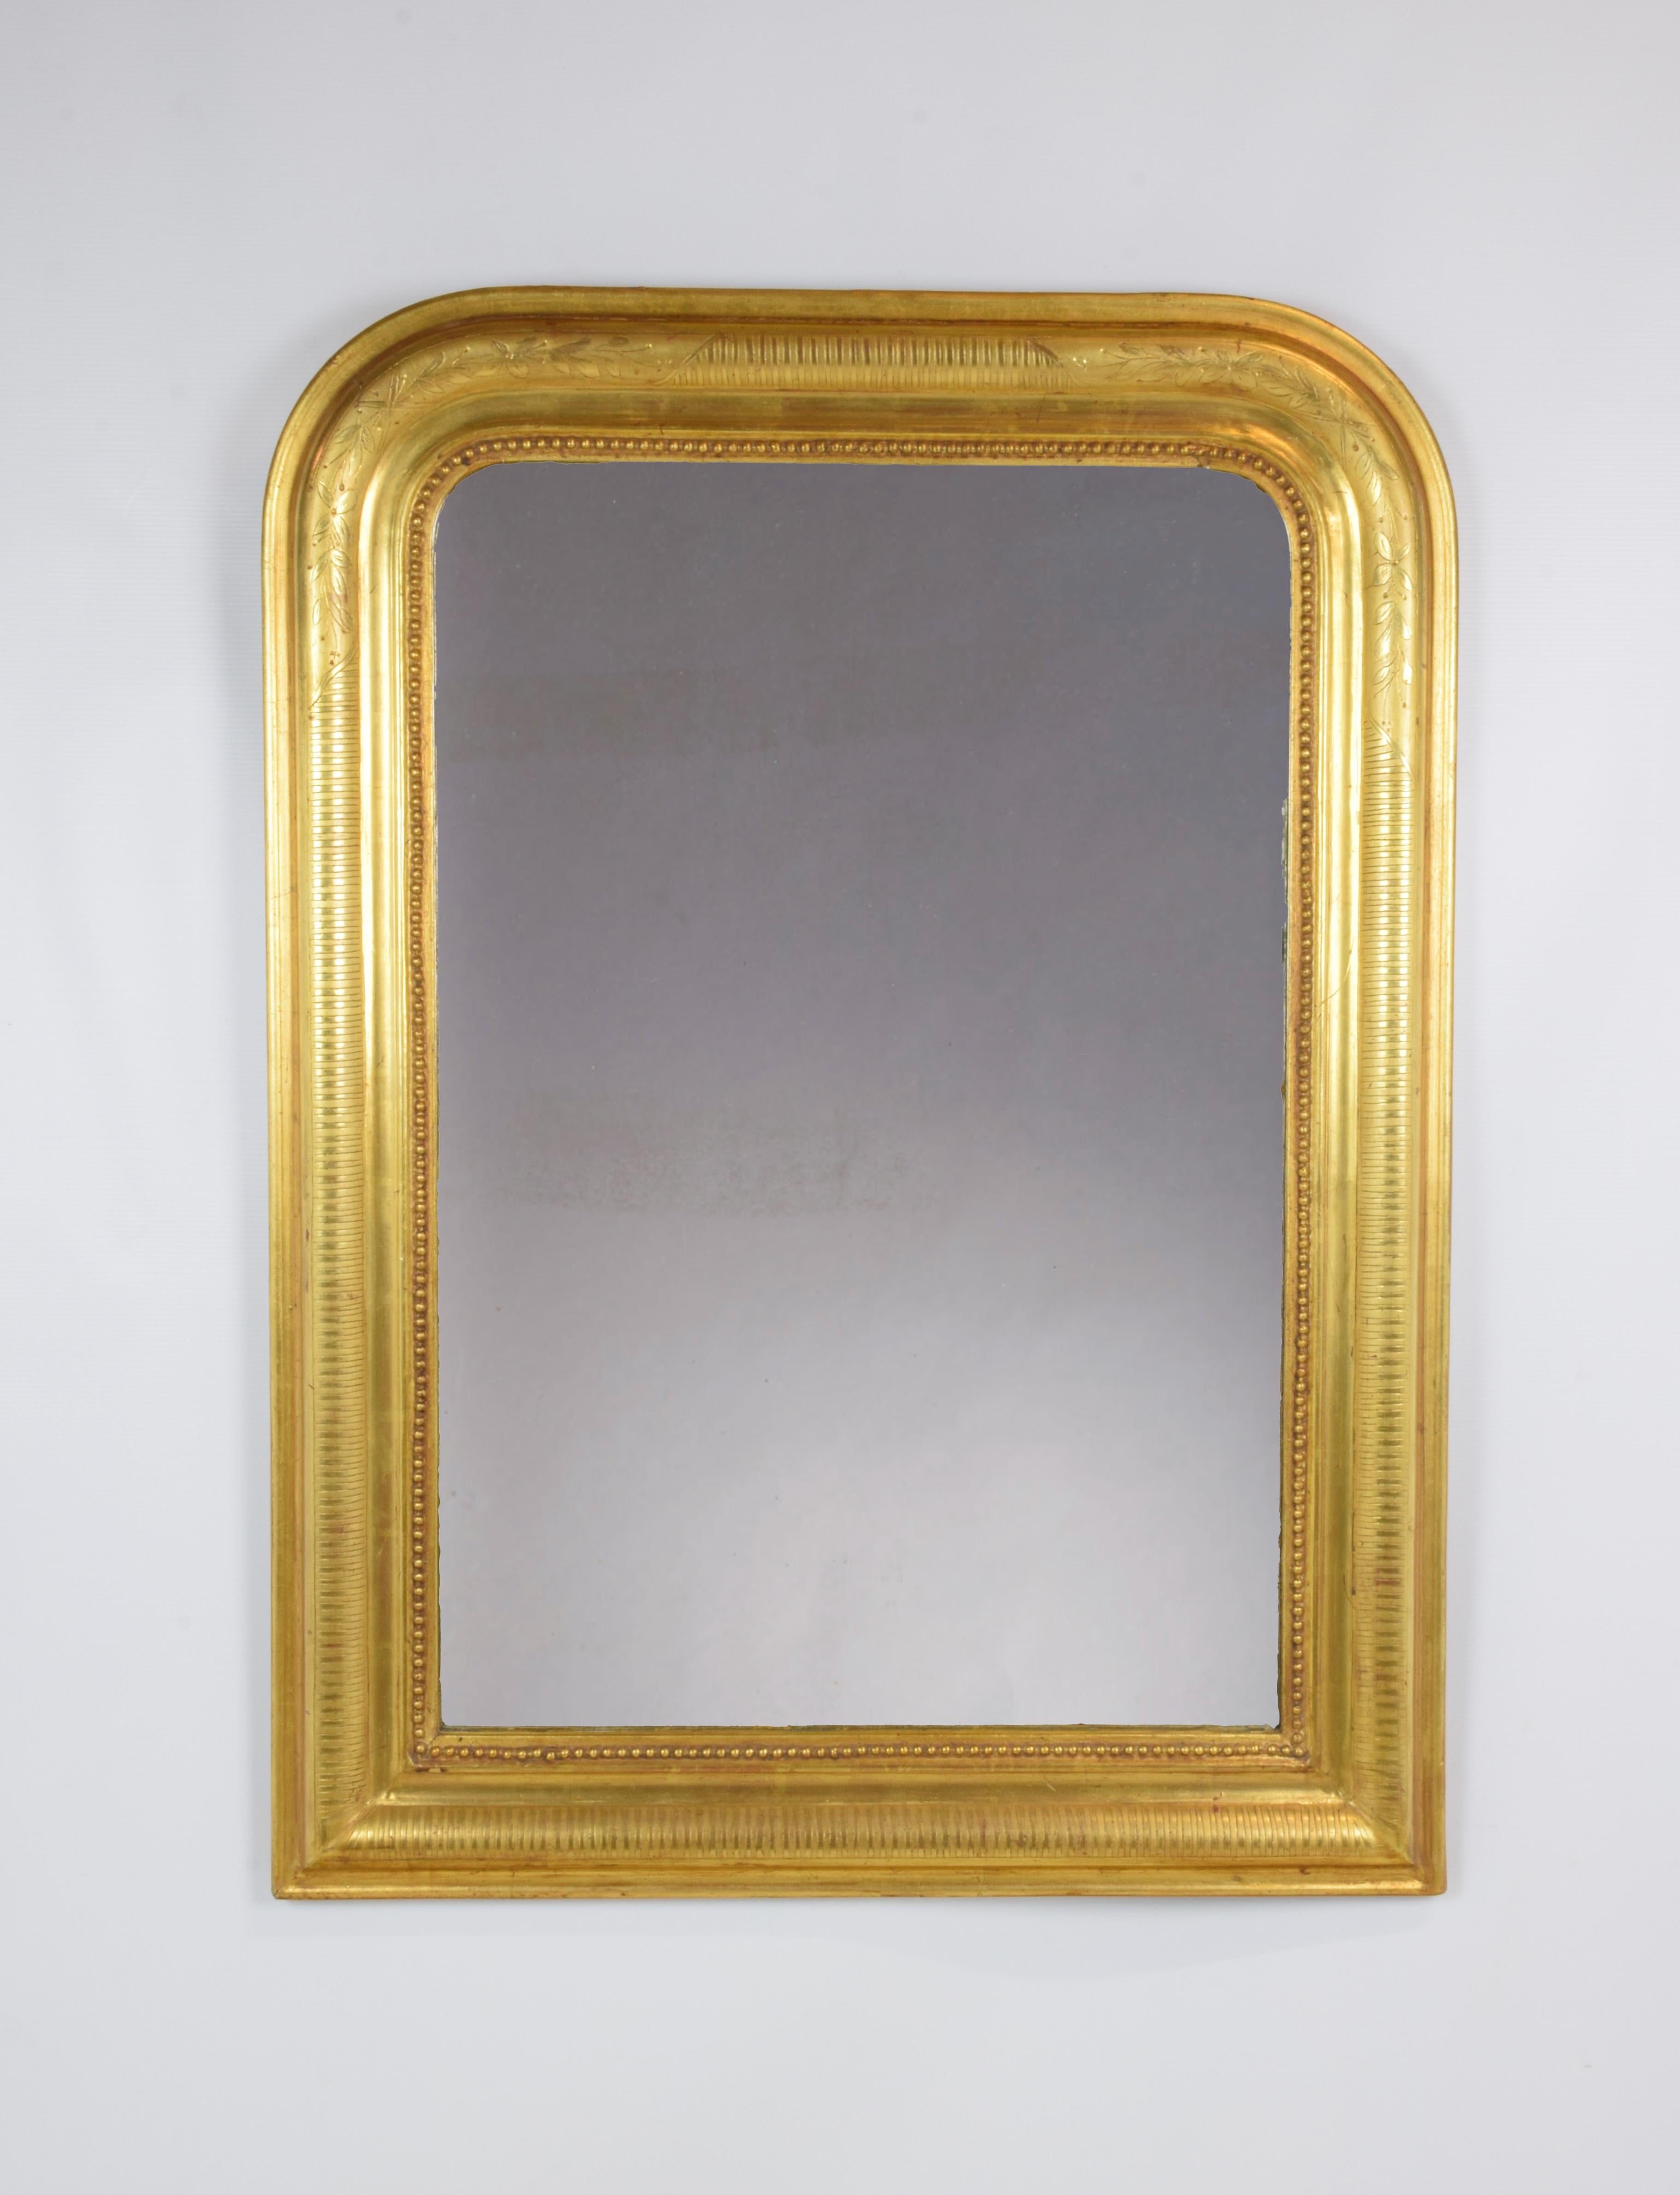 Made in France, circa 1880, the antique mirror has traditional lines with rounded corners. The frame is gilded with pure gold leaf on an engraved motif of matt and glossy stripes. A graceful floral decoration is engraved in the rounded parts. Inner